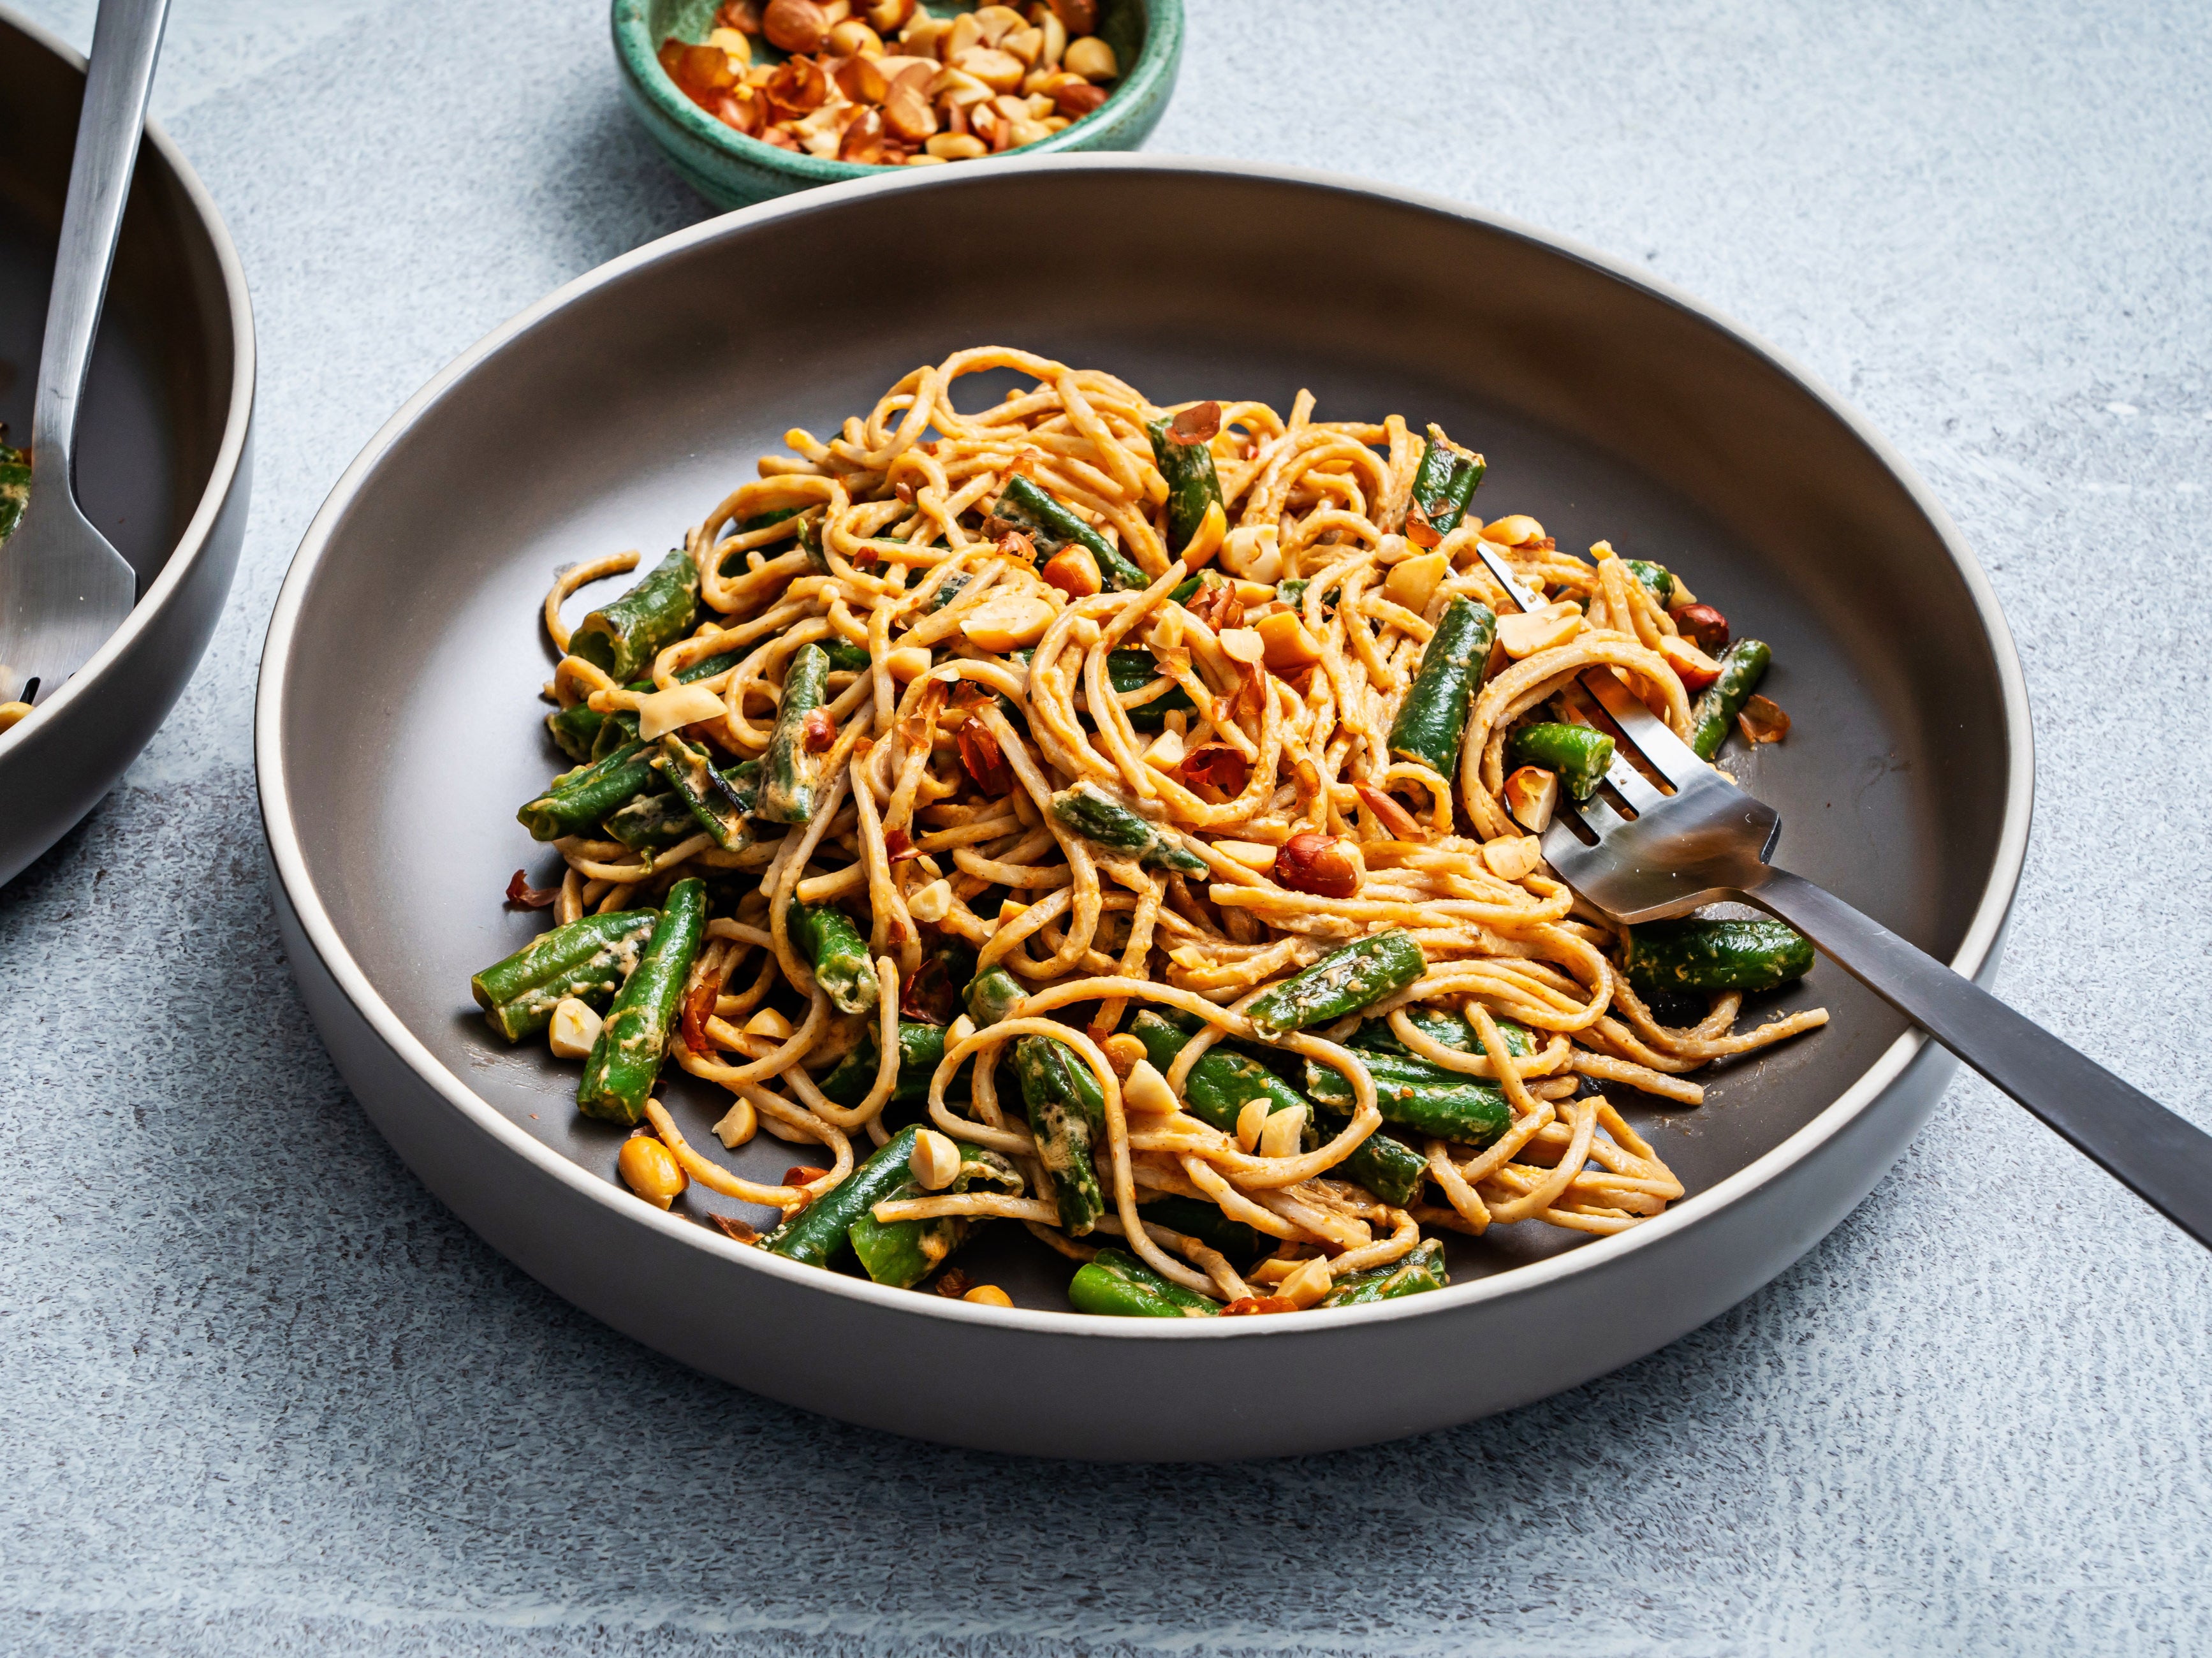 Soba is the noodle of choice here, as the nutty flavour complements the sauce